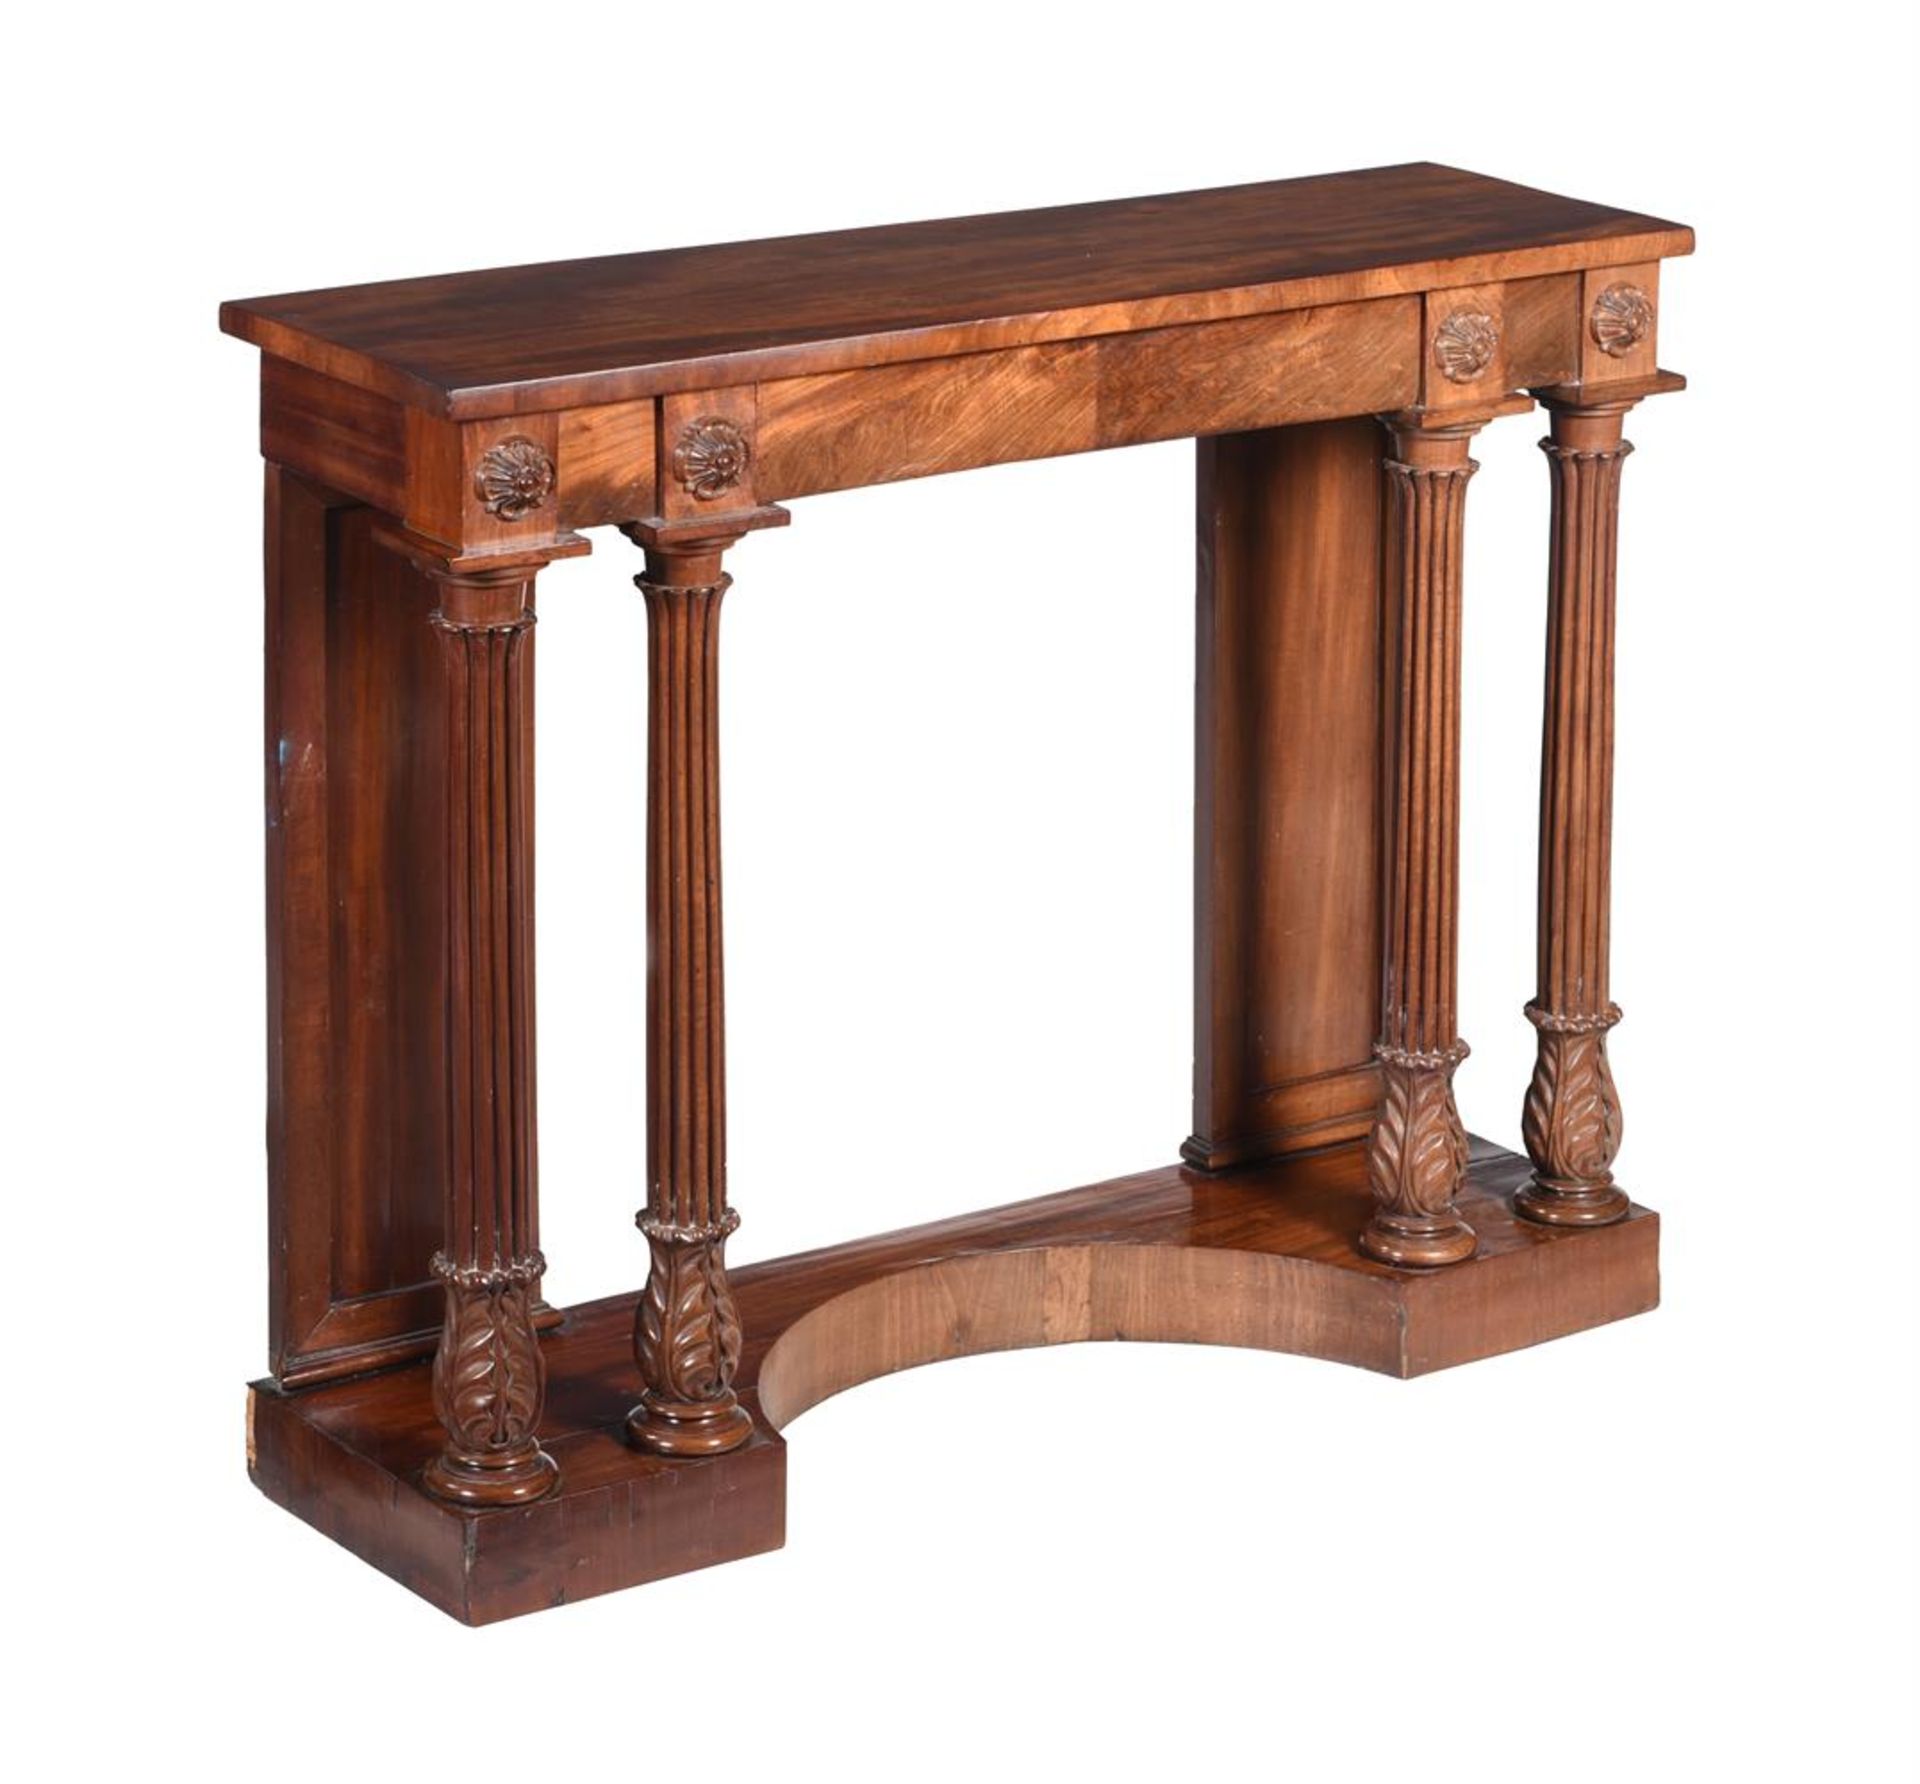 A MAHOGANY CONSOLE OR SIDE TABLE, SECOND QUARTER 19TH CENTURY